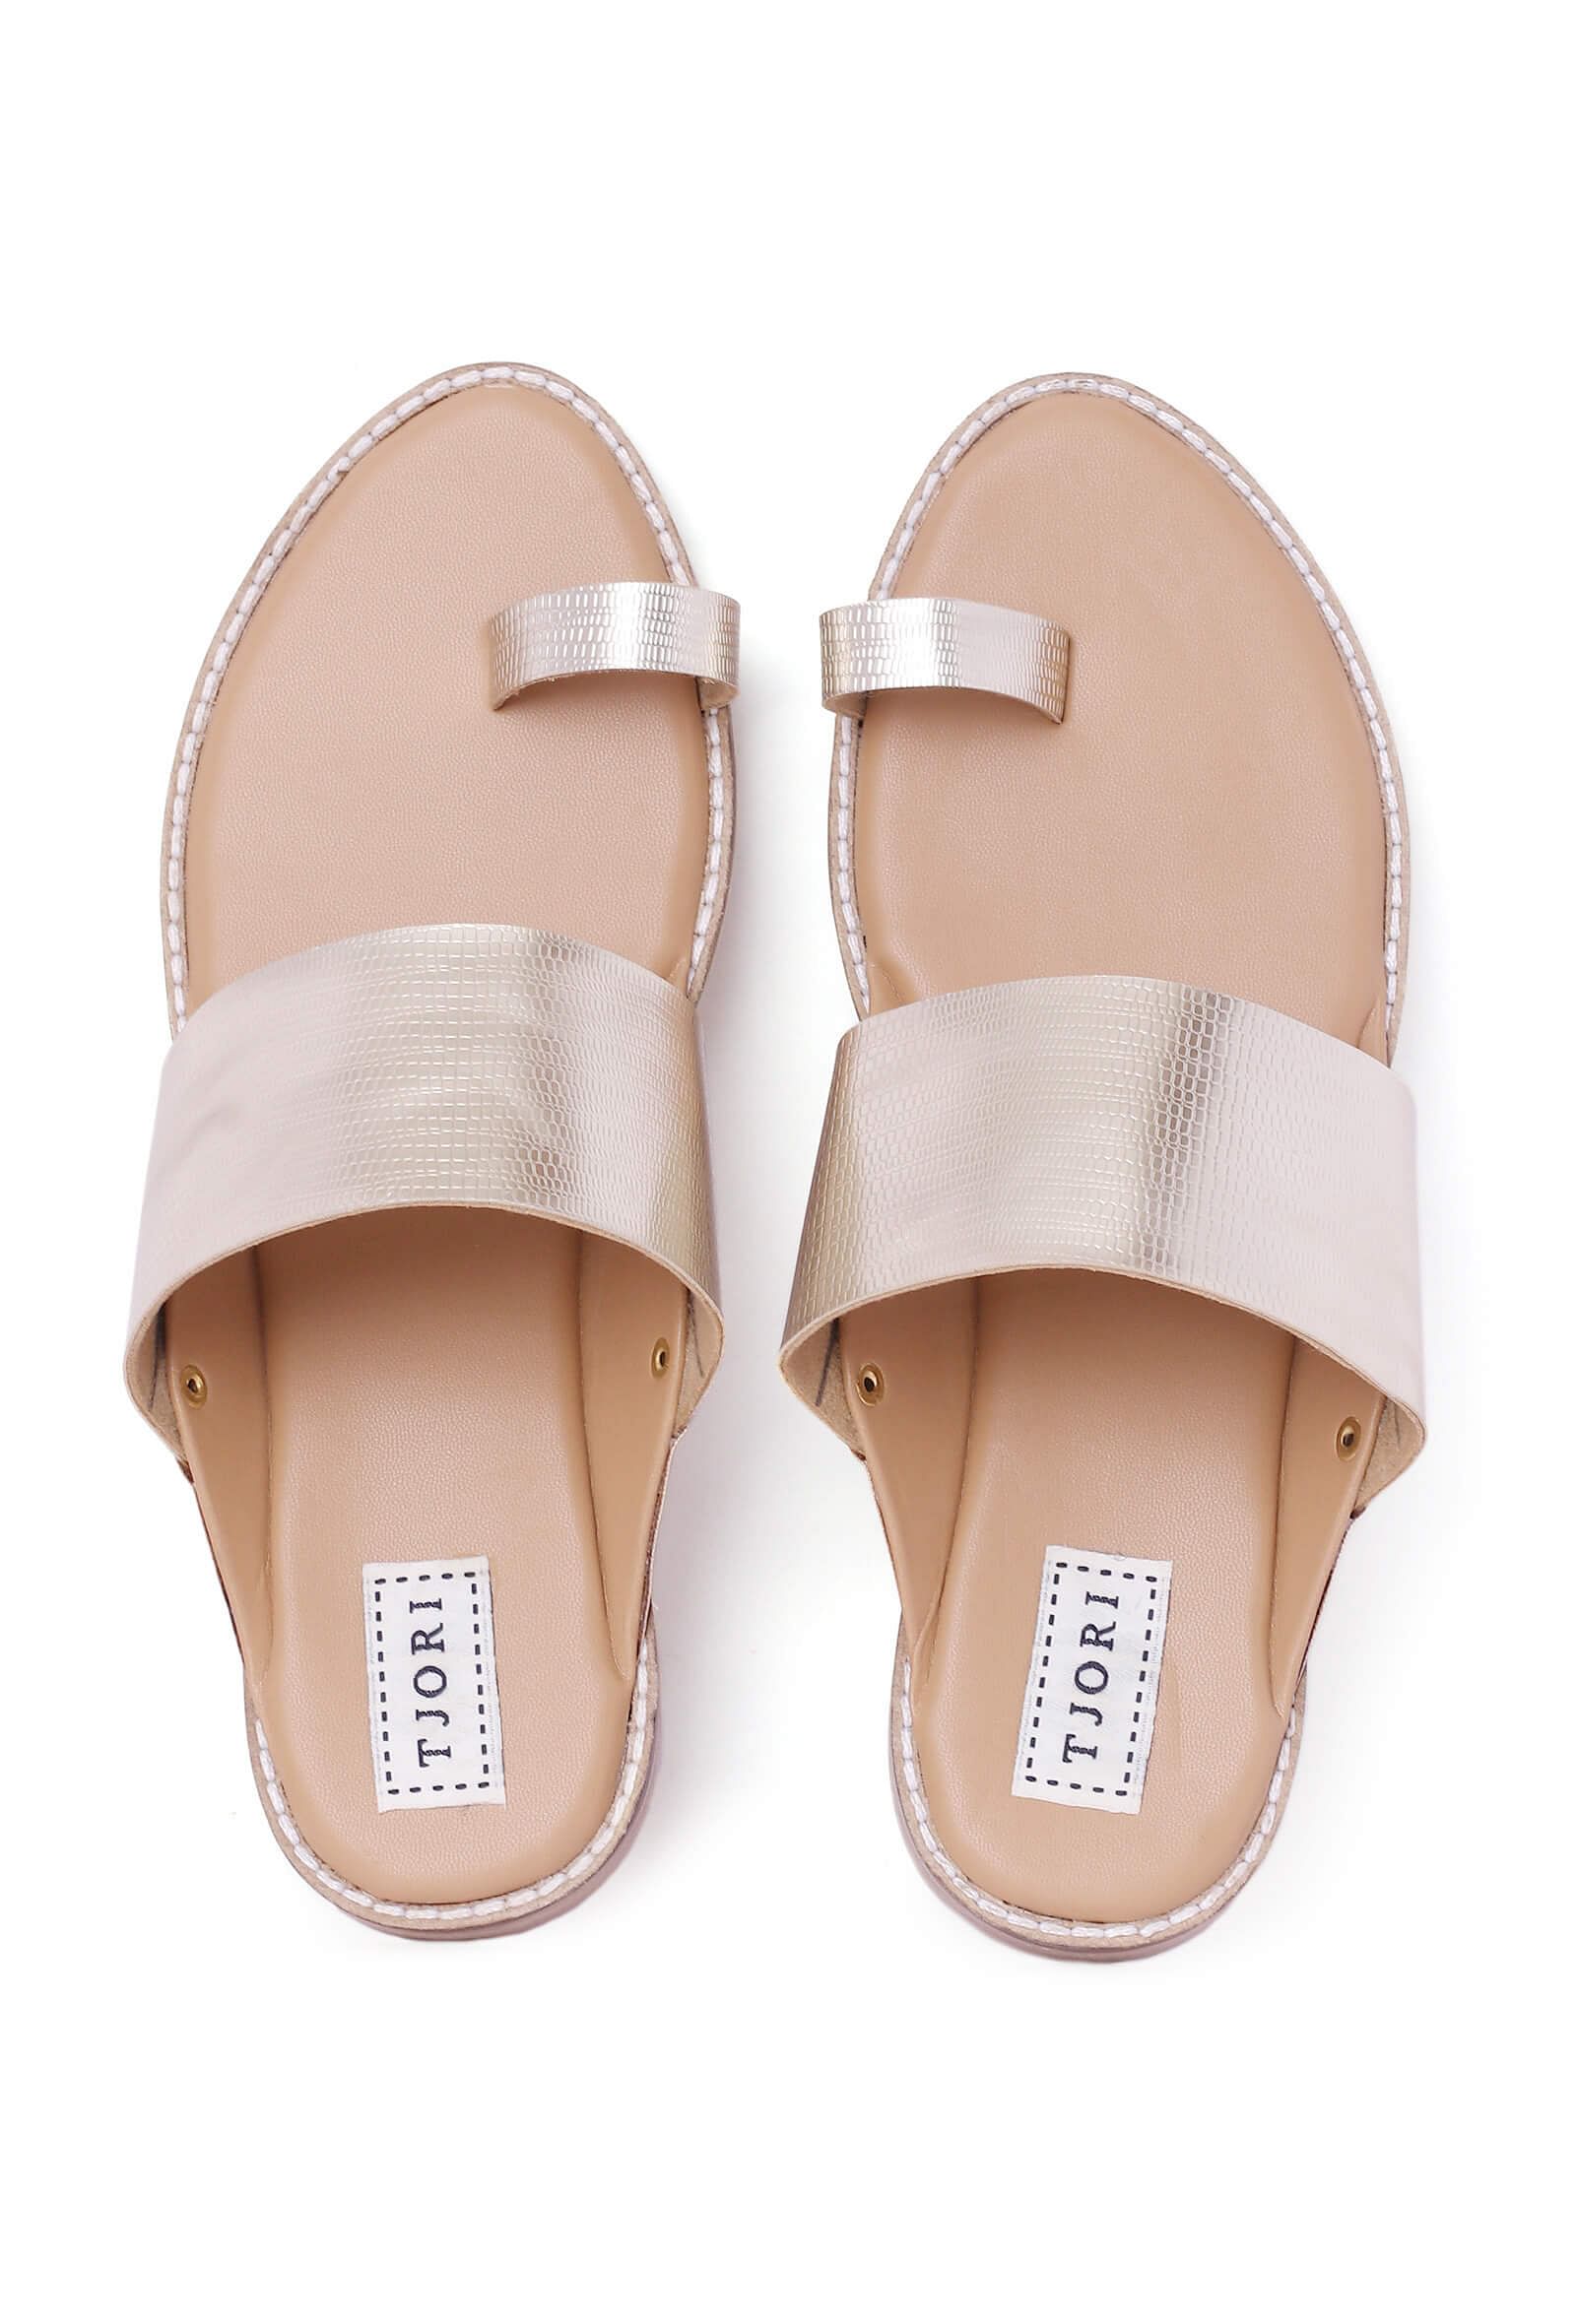 Textured Silver Cruelty-Free Leather Kolhapuri Inspired  Chappals